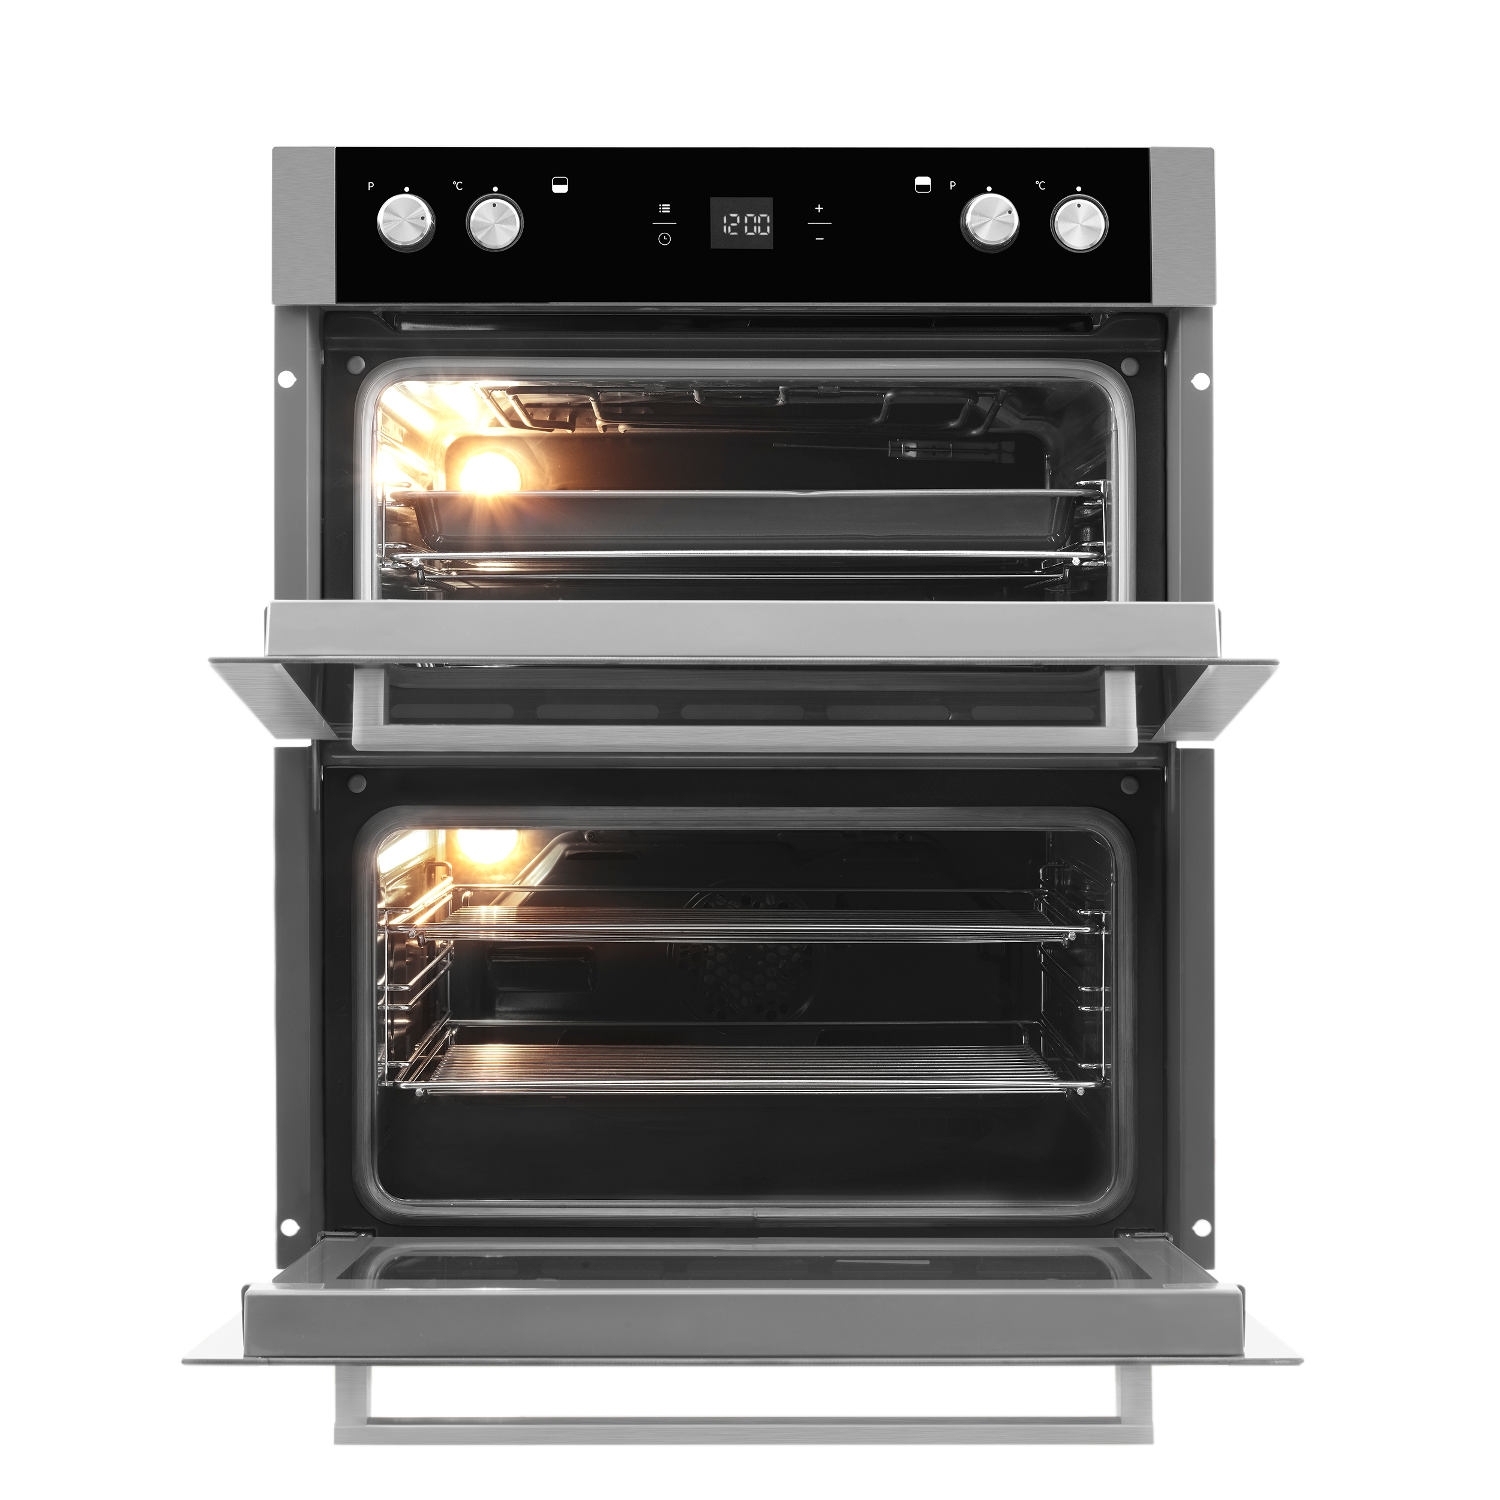 Blomberg OTN9302X Built Under Electric Double Oven - Stainless Steel - 2